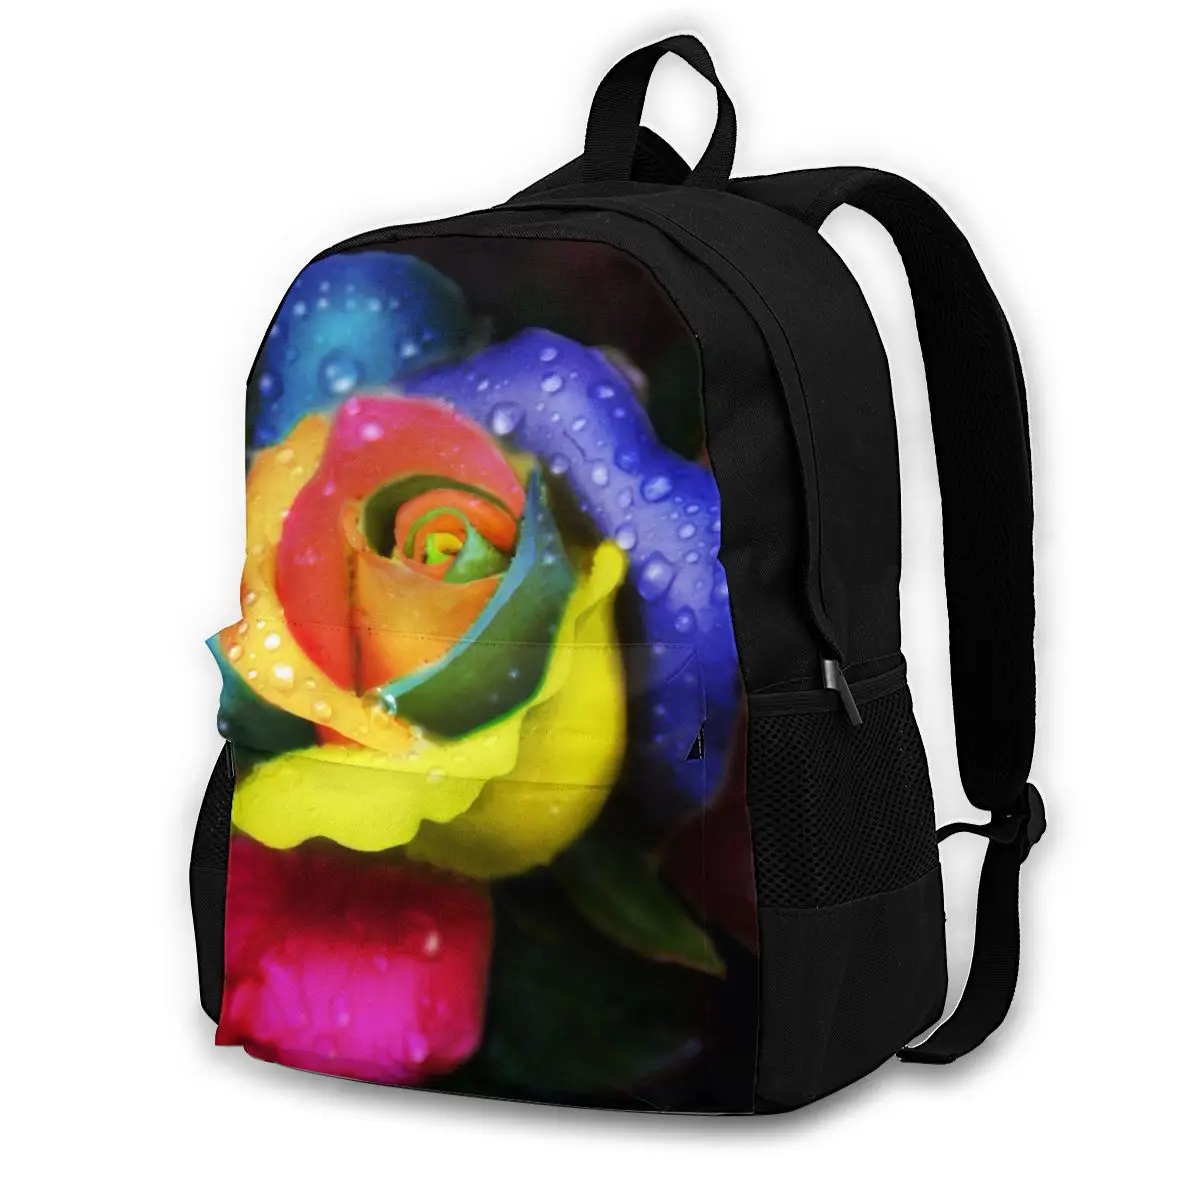 

2021 new backpack fashion casual backpack personalized student school bag backpack adult backpack